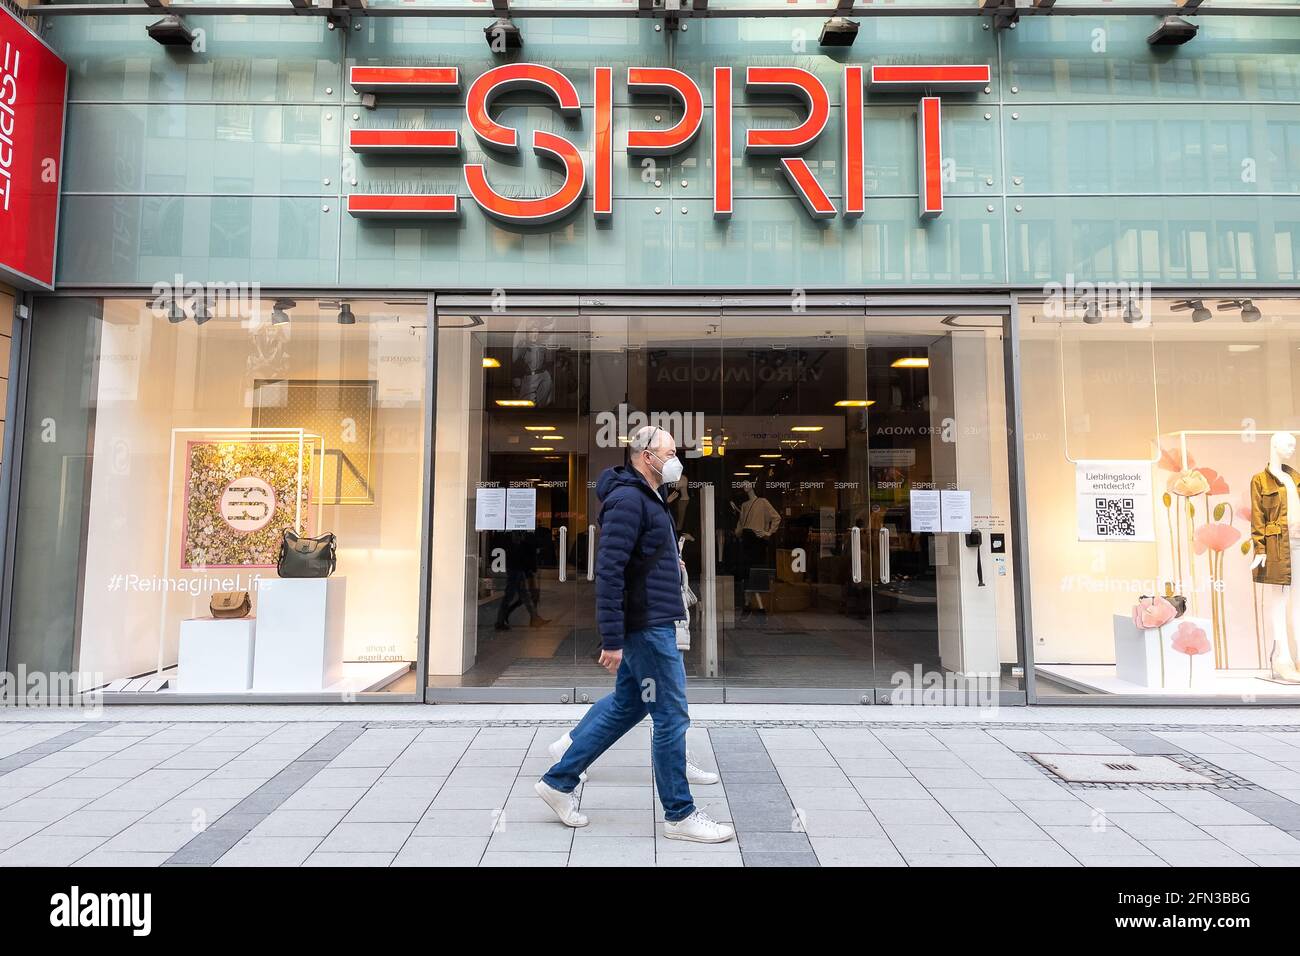 Esprit store sign in the town center of Munich Stock Photo - Alamy